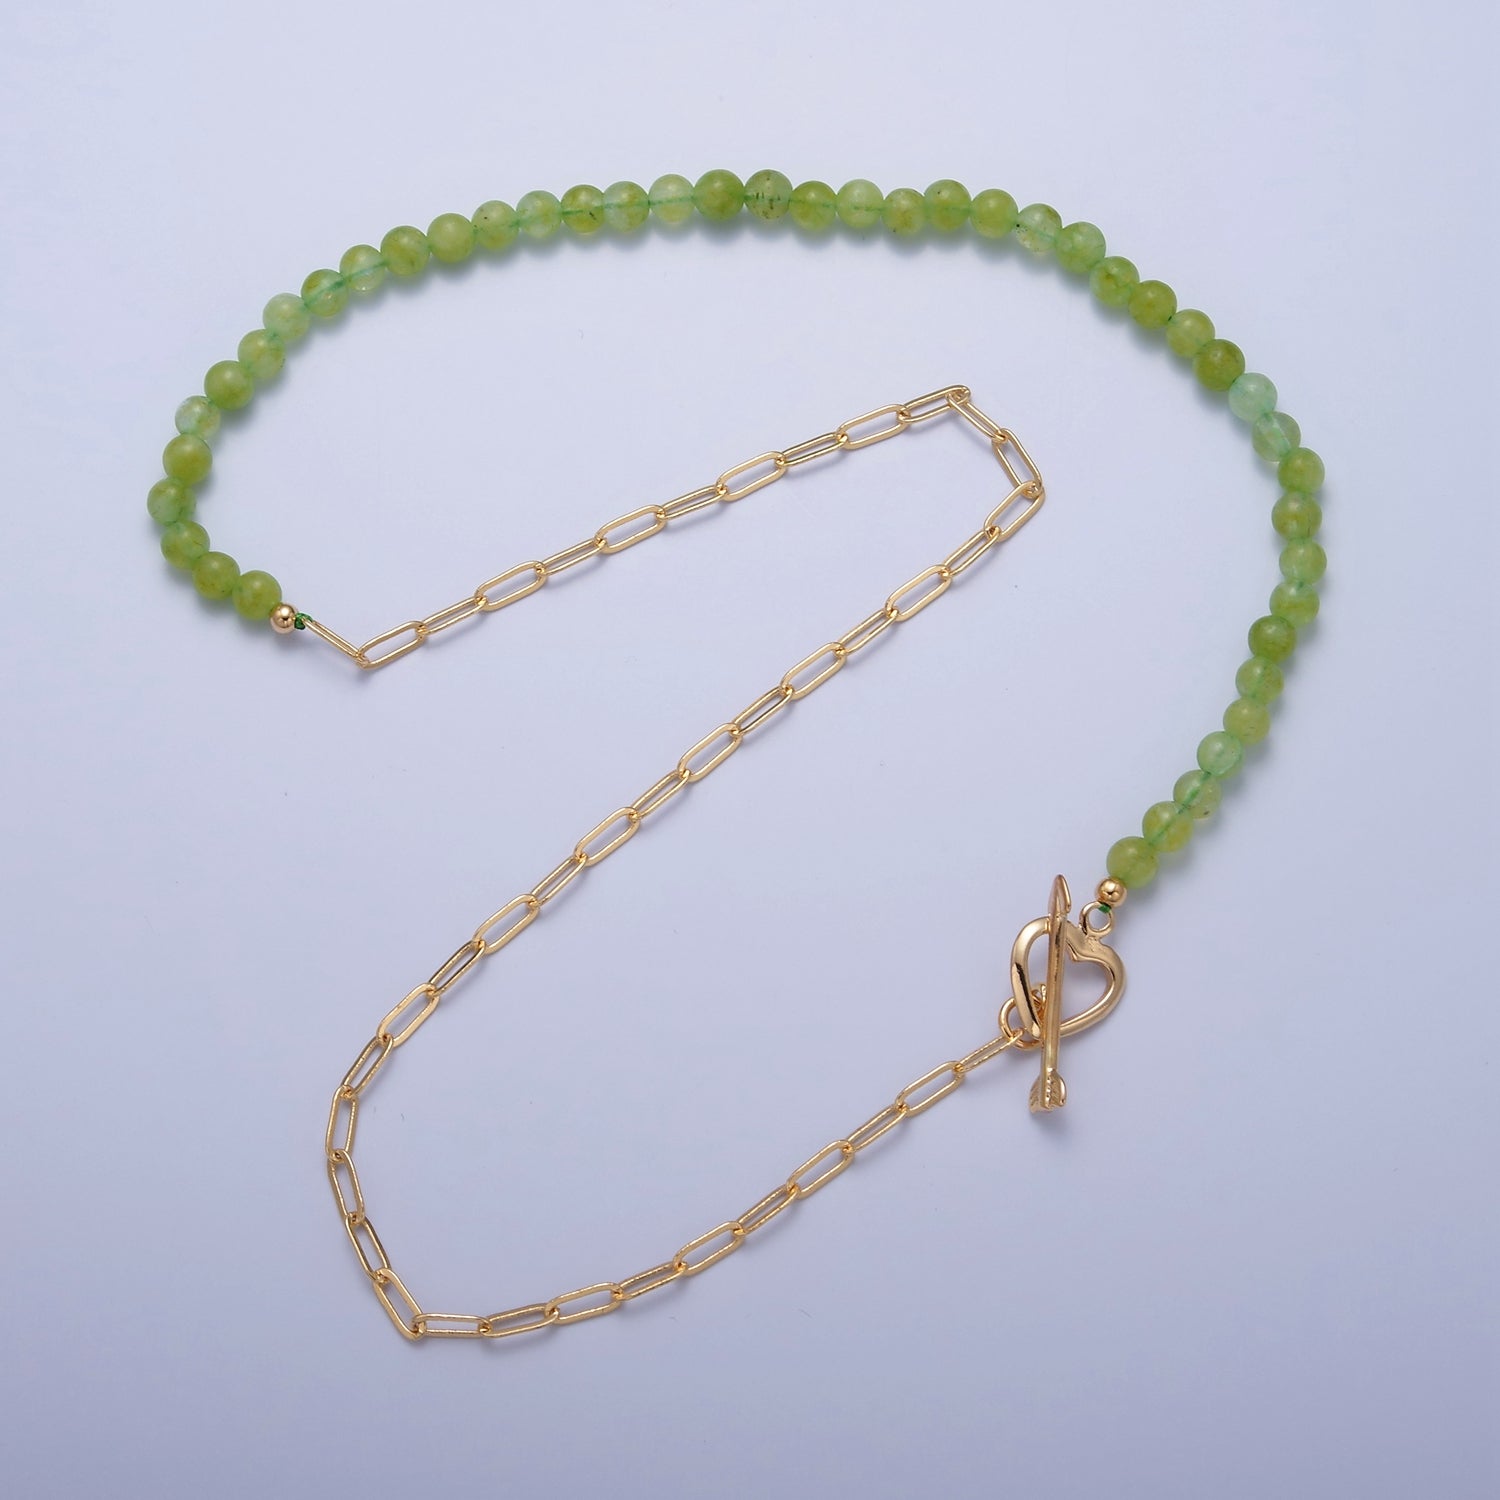 Dainty Half Bead Half Link Chain Necklace, 24k Gold Filled Paperclip Chain with Green Jade Necklace Heart Toggle Clasp WA-959 - DLUXCA